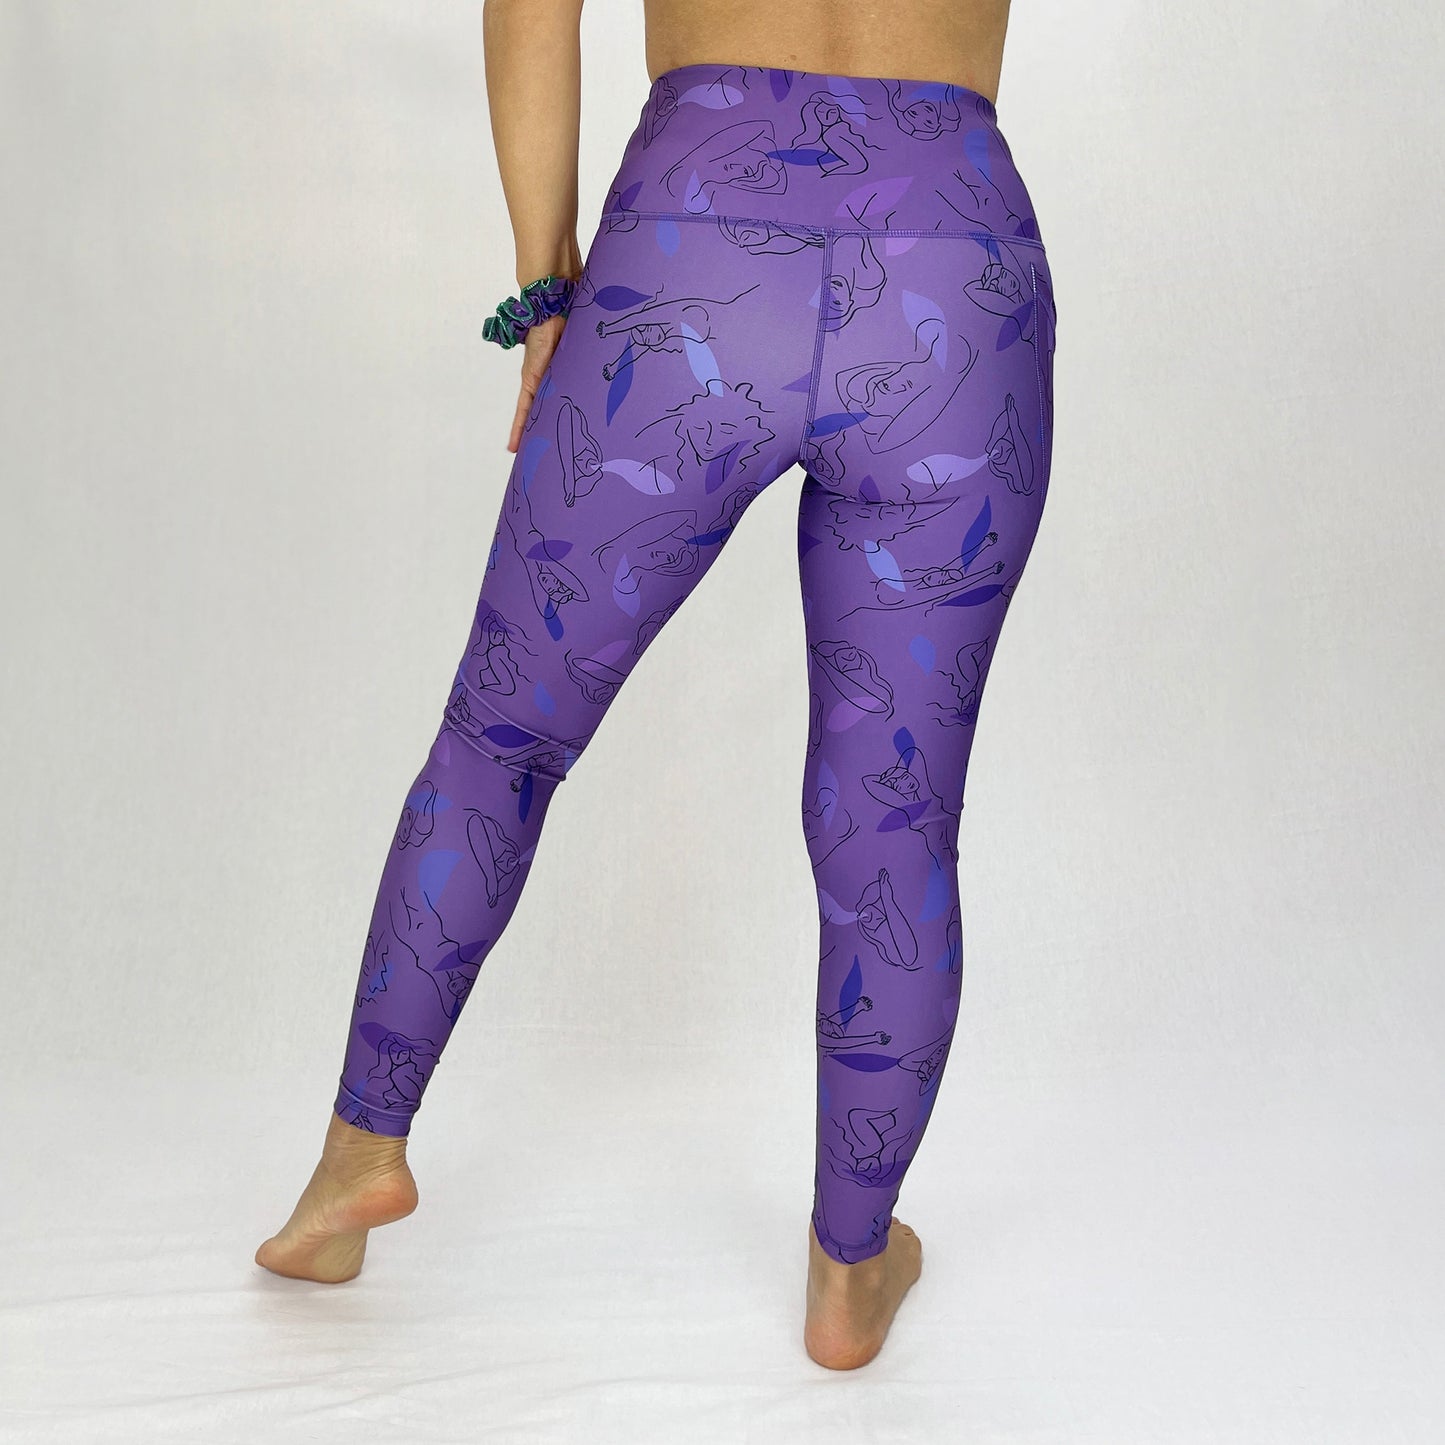 colourful high rise leggings with pockets made sustainably from recycled materials - purple women - back